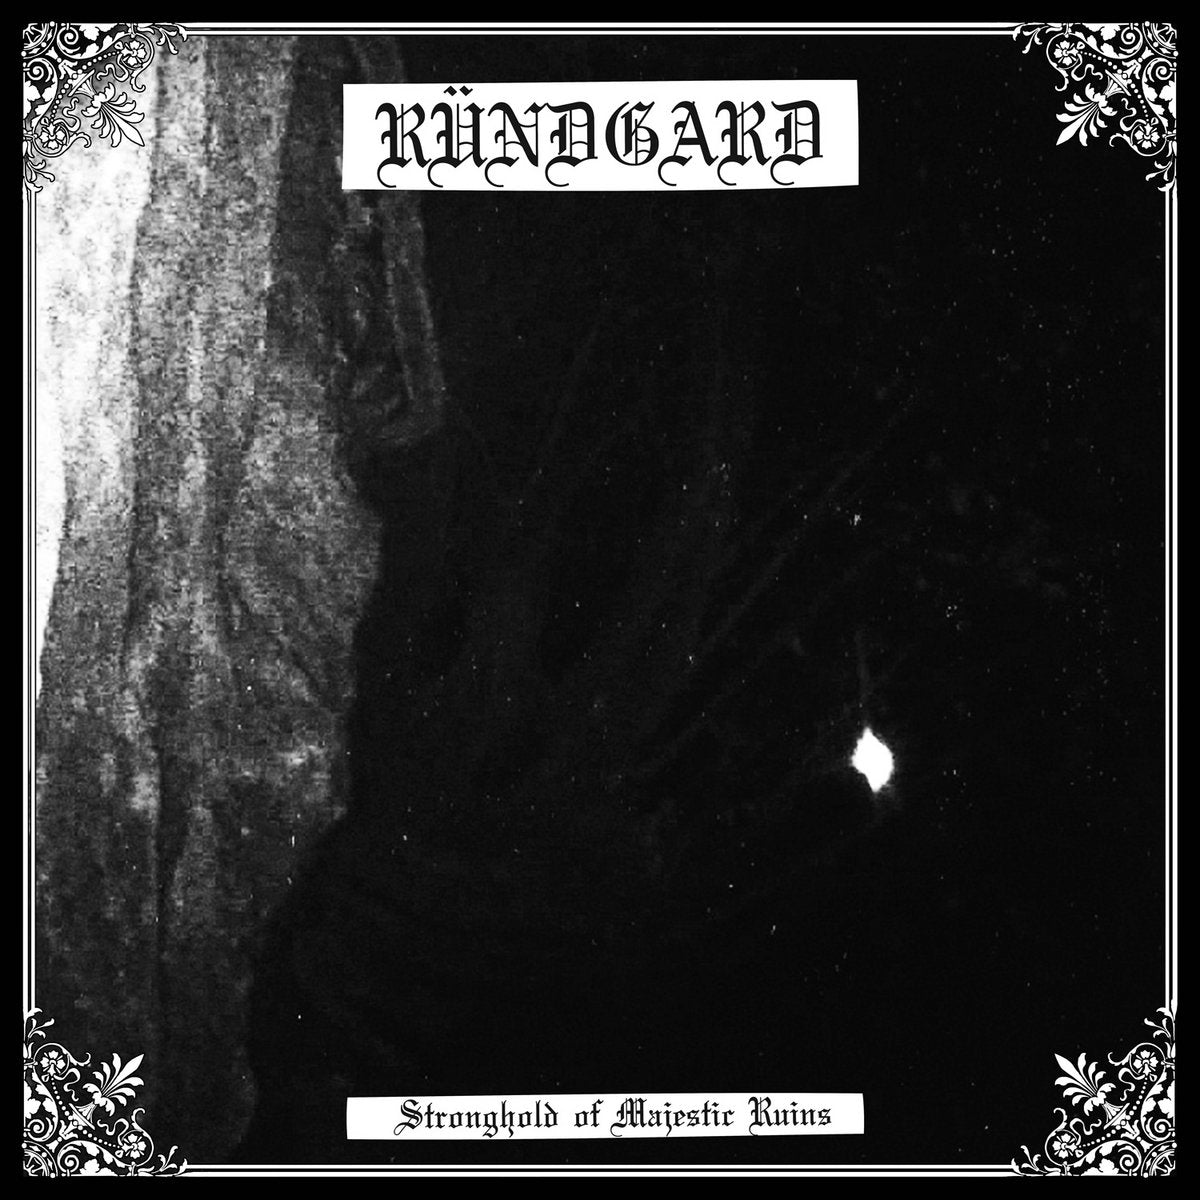 [SOLD OUT] RÜNDGARD "Stronghold of Majestic Ruins" vinyl LP (color, lim.250)